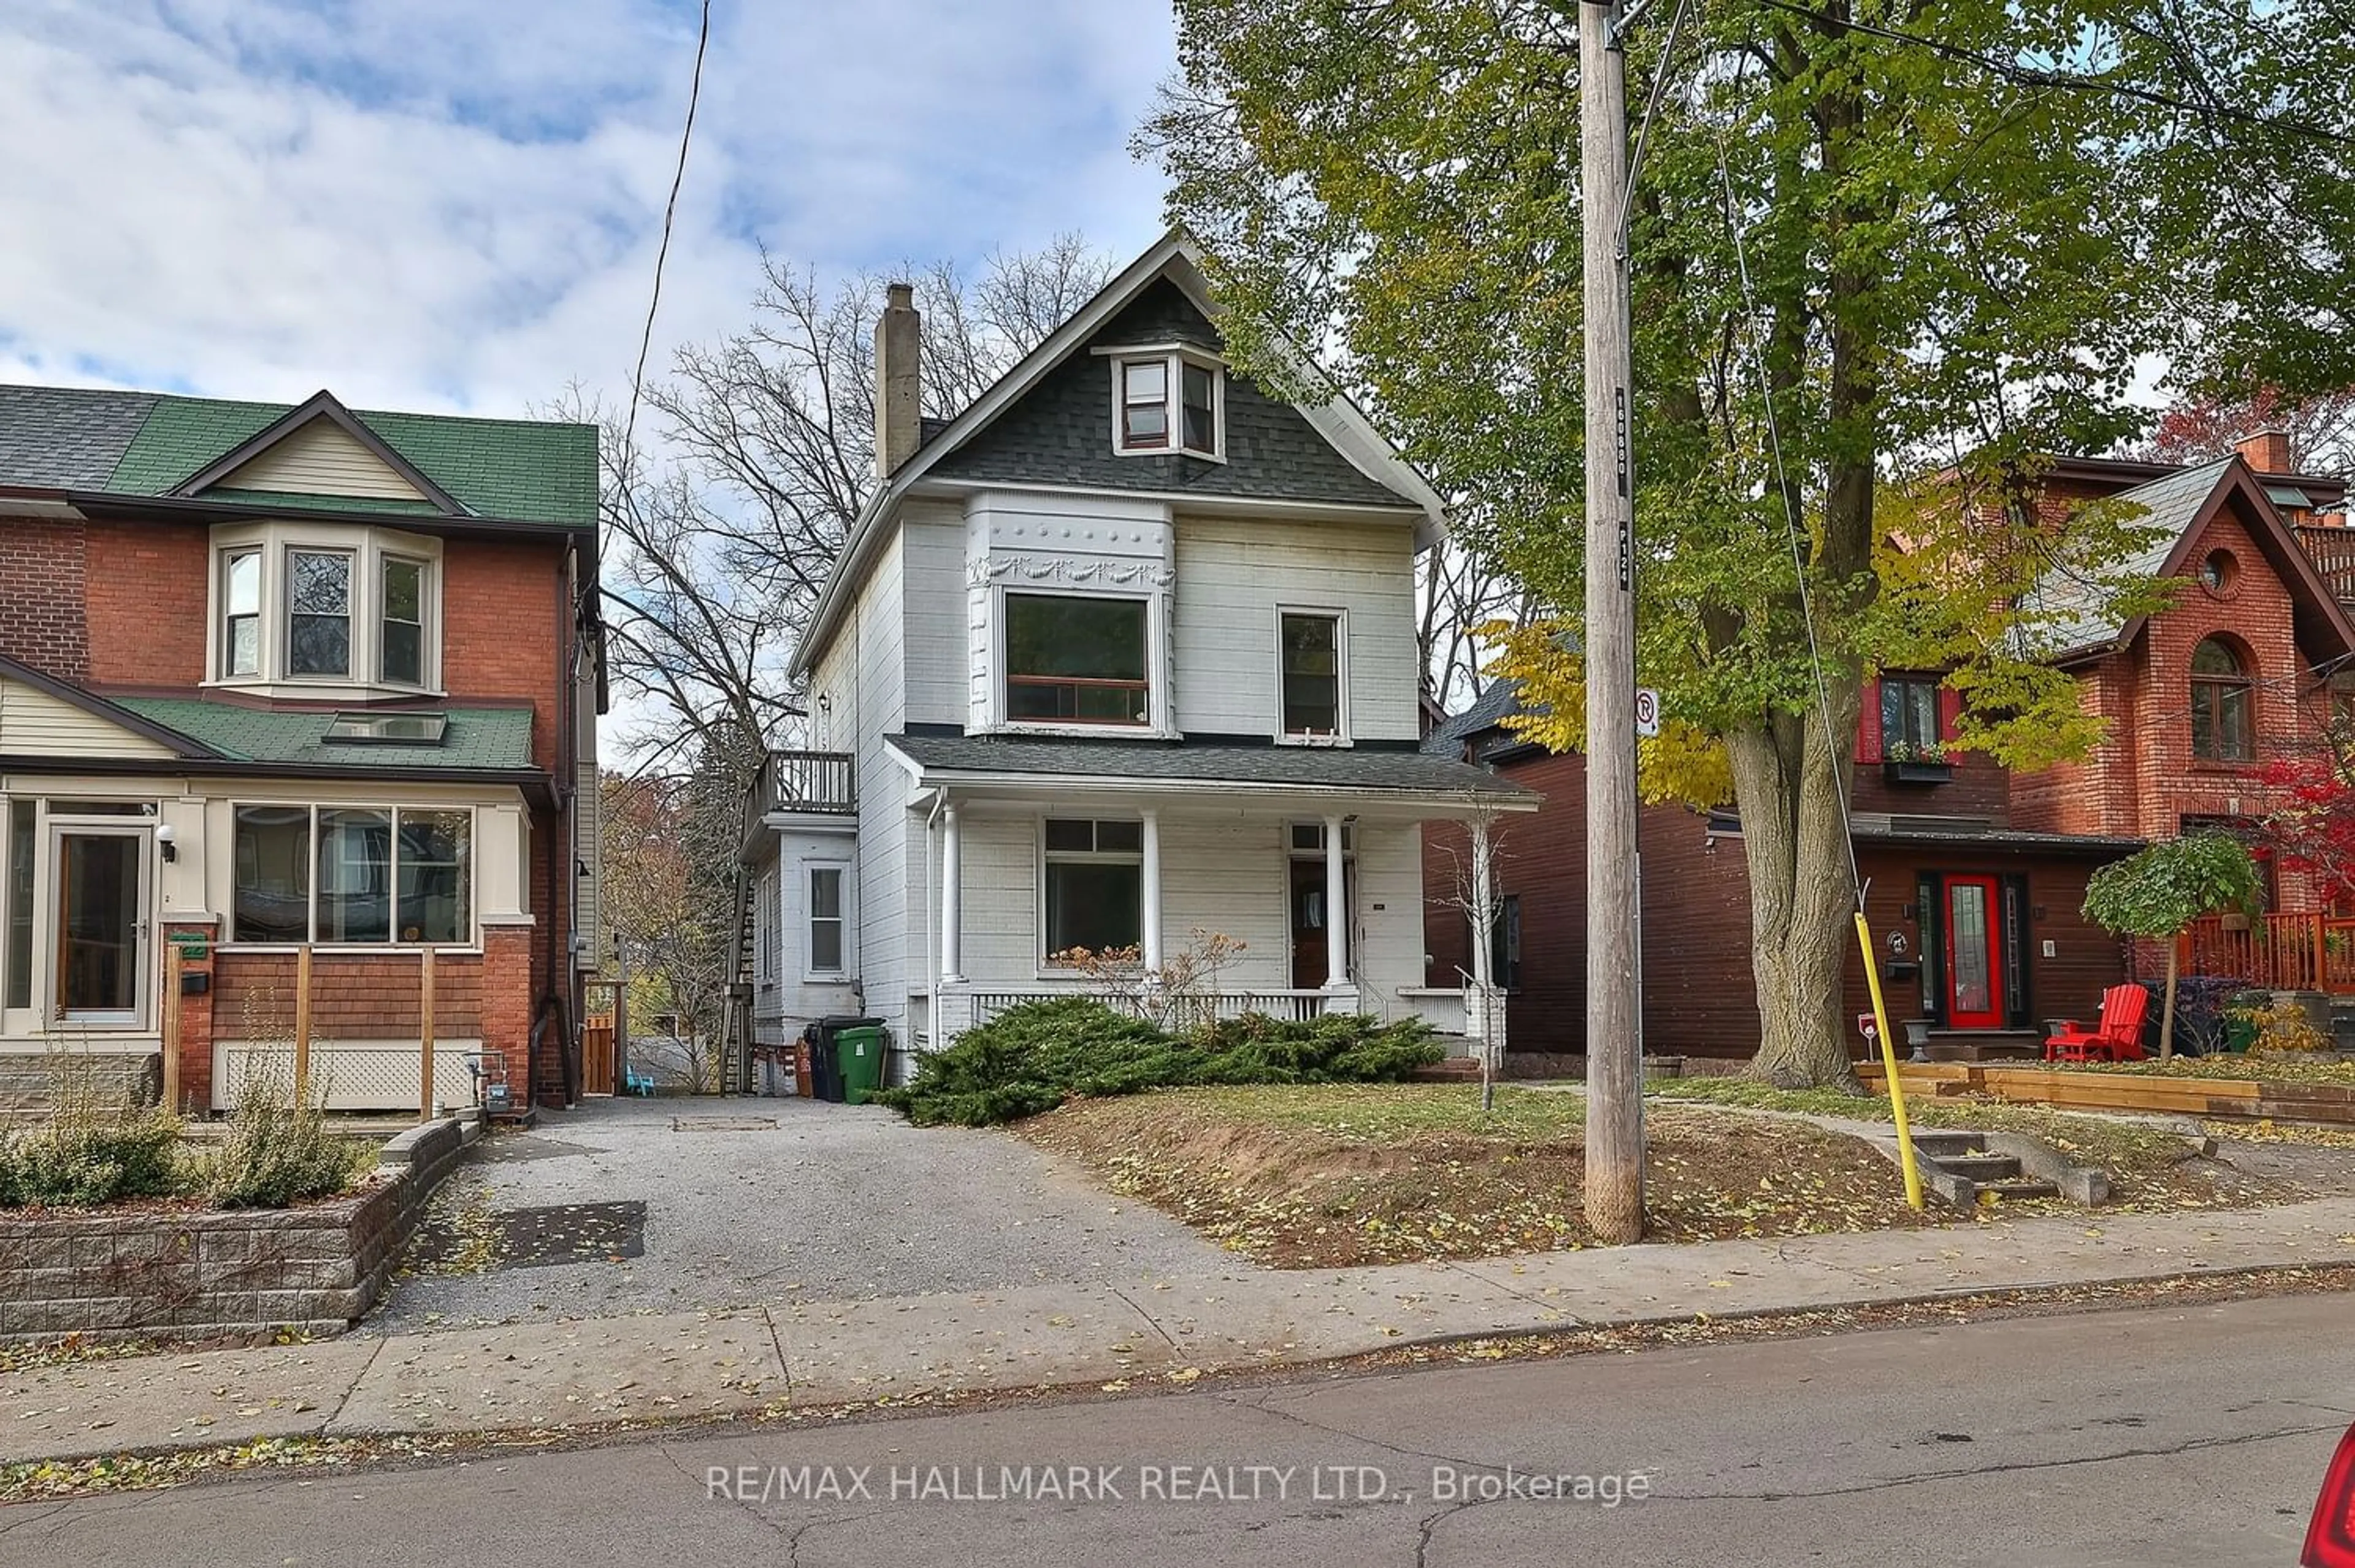 Home with unknown exterior material for 124 Waverley Rd, Toronto Ontario M4L 3T3